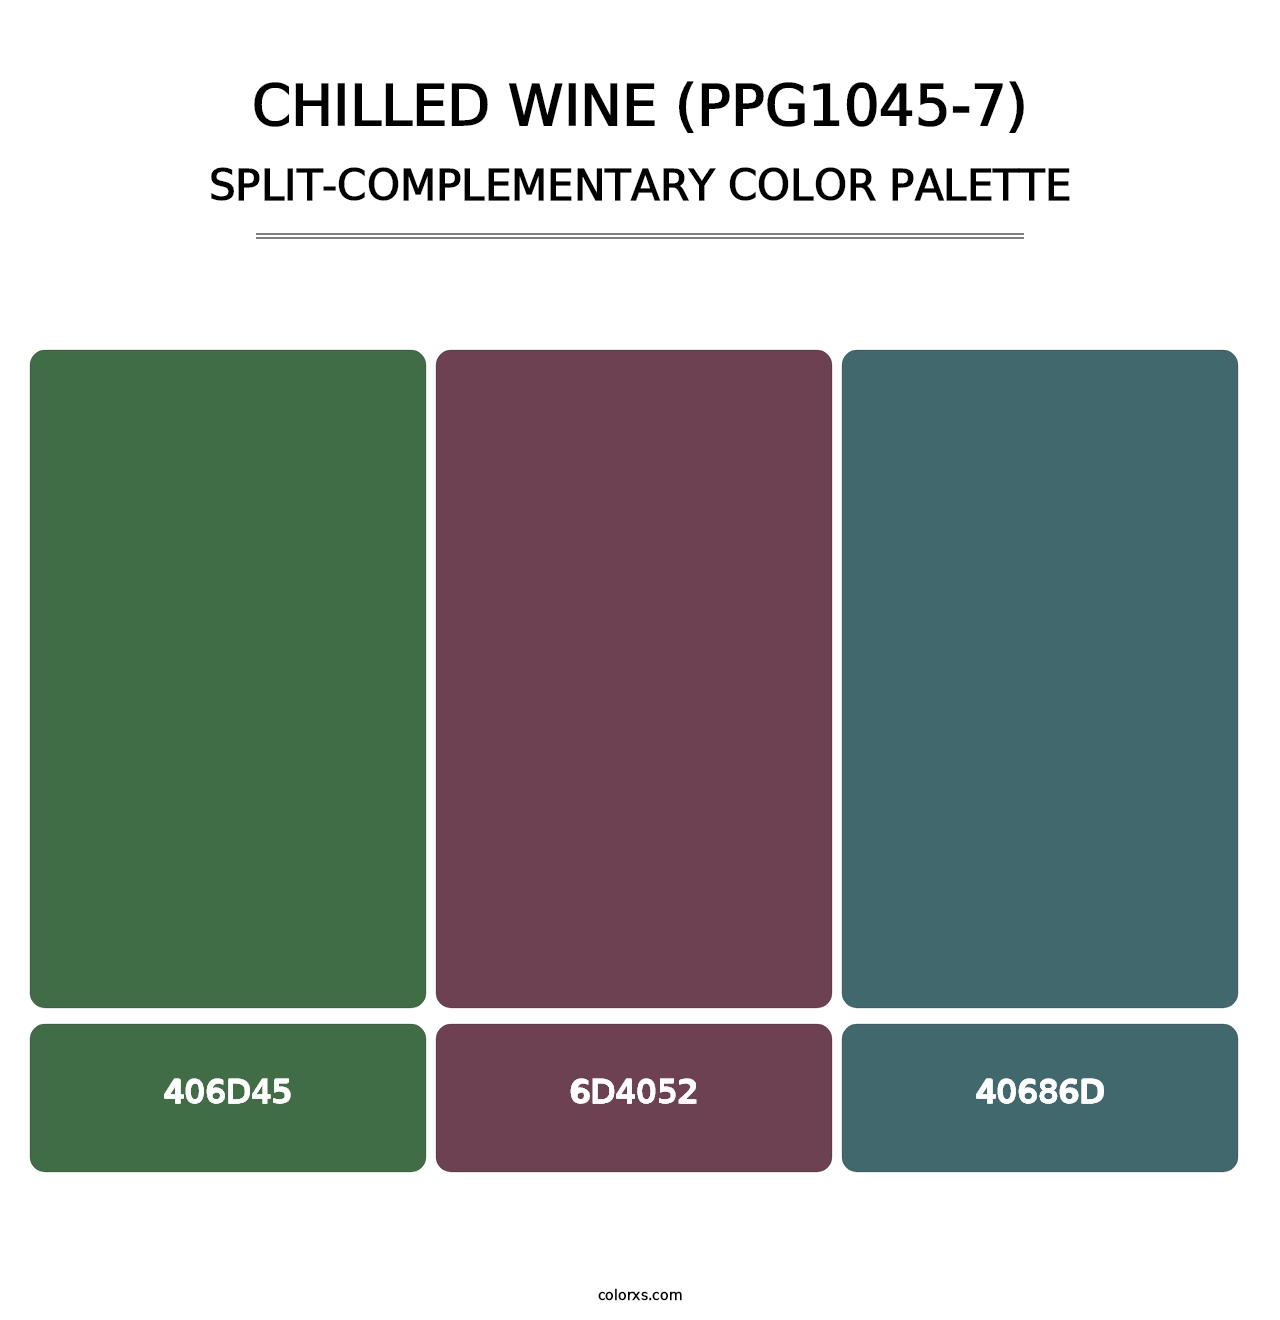 Chilled Wine (PPG1045-7) - Split-Complementary Color Palette